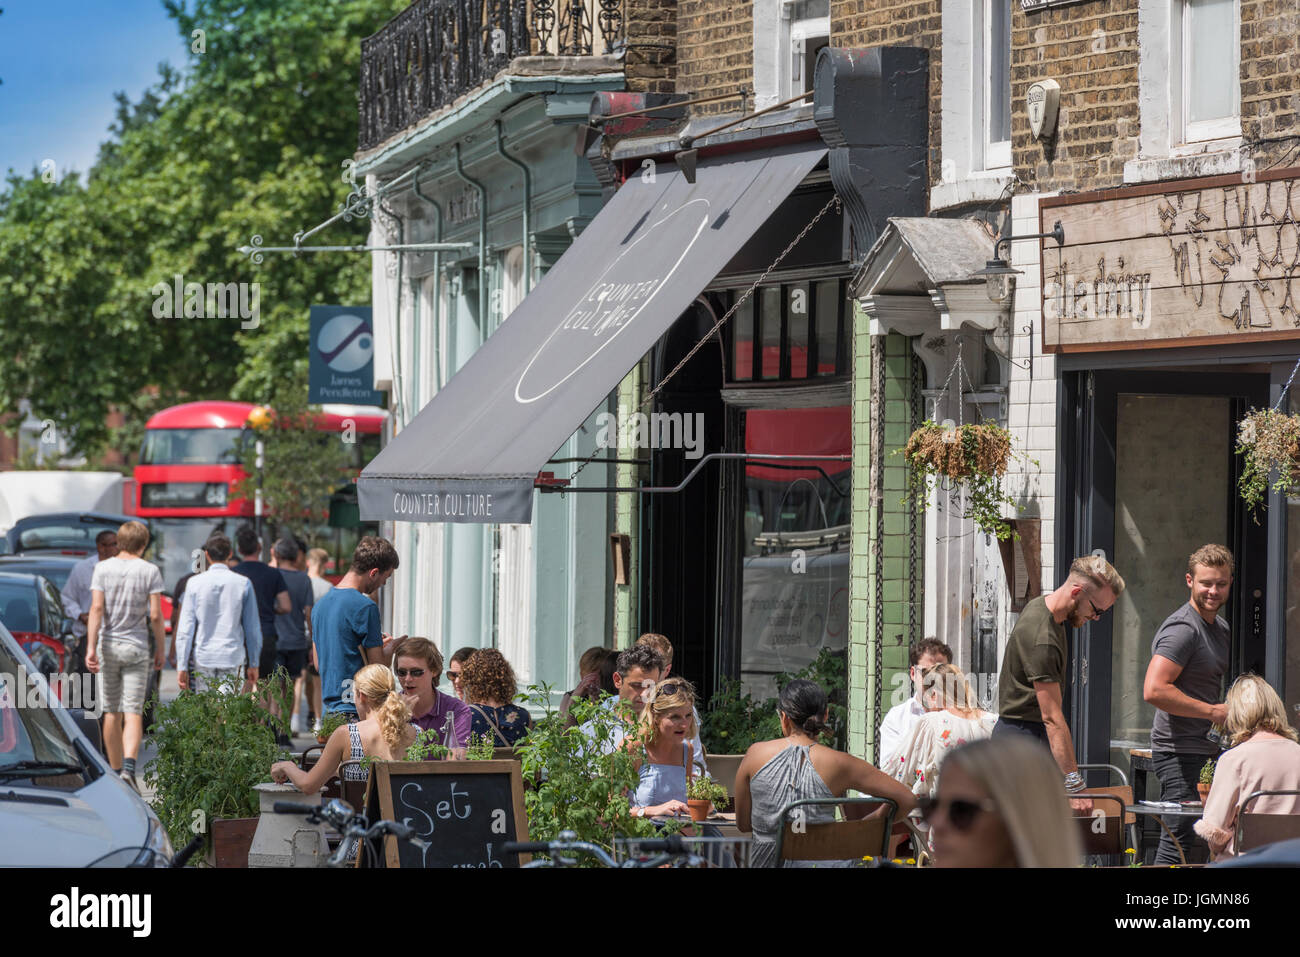 General street view of street life near Clapham Common, on 'The Pavement' in London, Enlgland UK Stock Photo